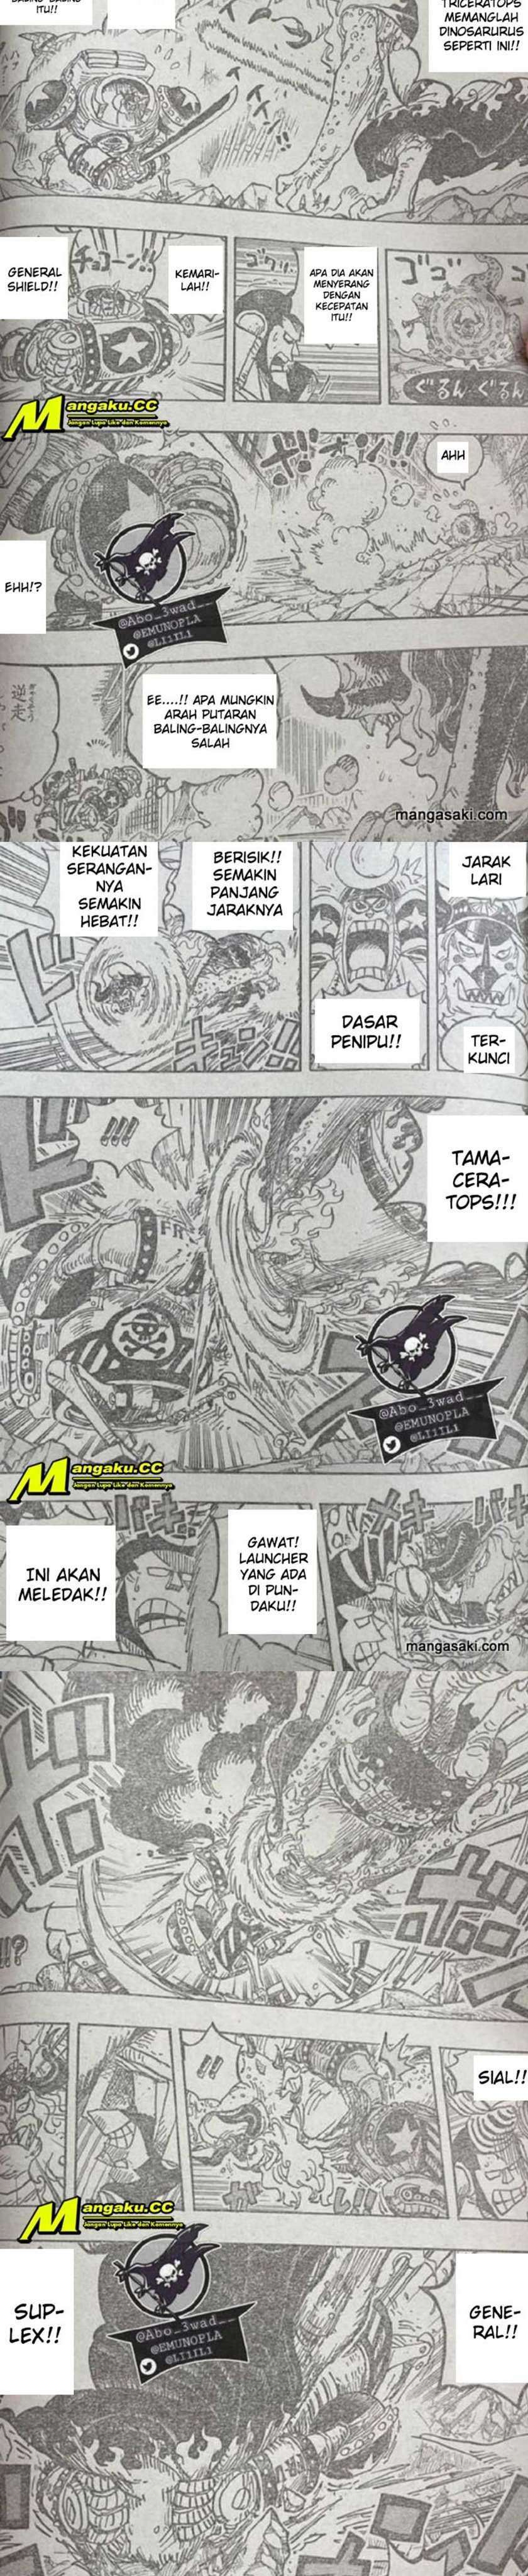 One Piece Chapter 1019 Lq - 35